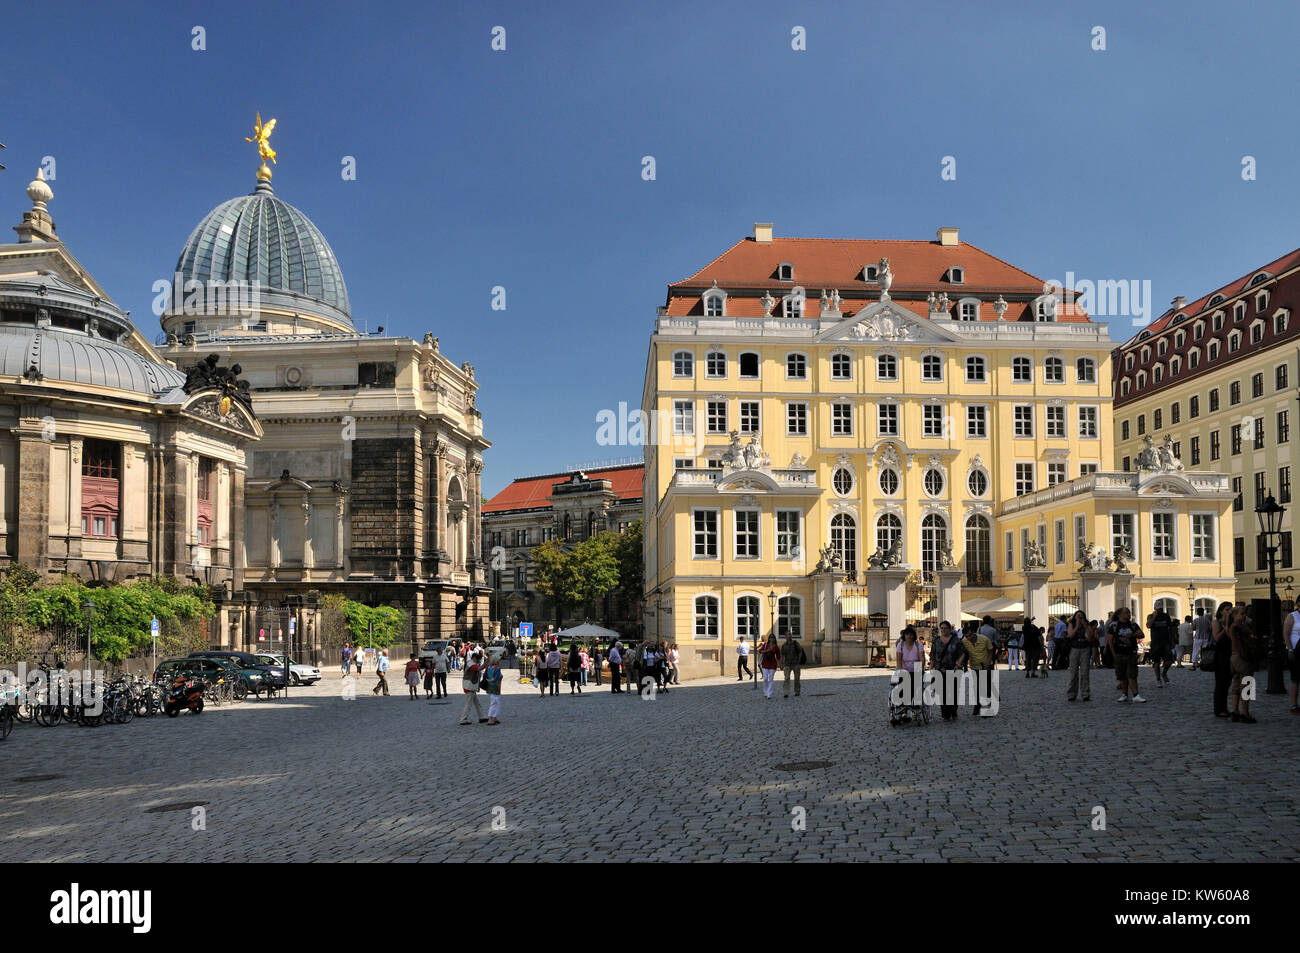 Academy of arts and Coselpalais, Dresden new market, Kunstakademie und Coselpalais, Dresden Neumarkt Stock Photo